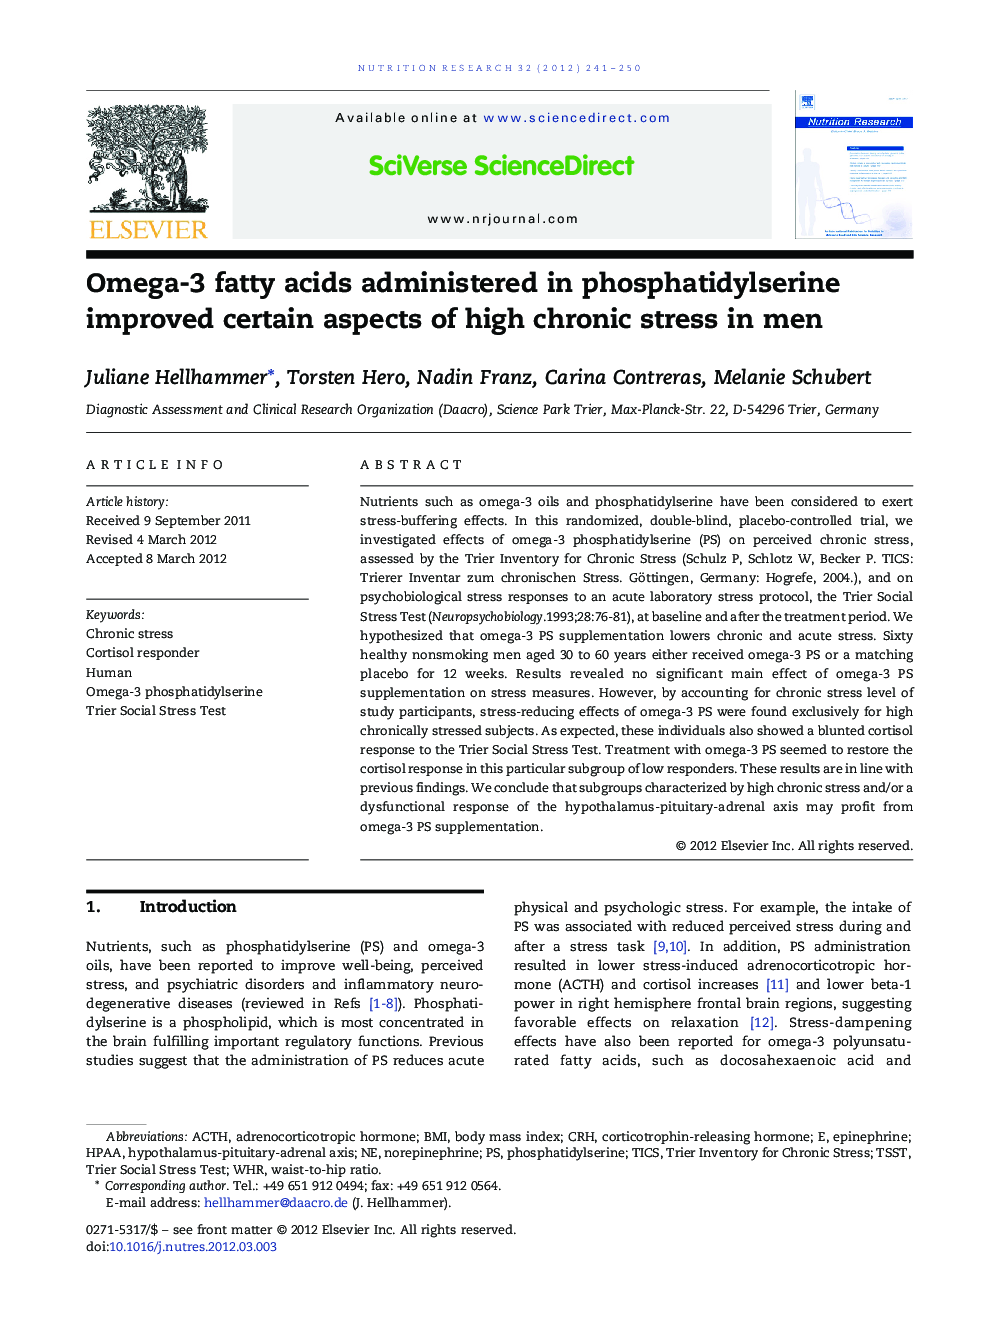 Omega-3 fatty acids administered in phosphatidylserine improved certain aspects of high chronic stress in men